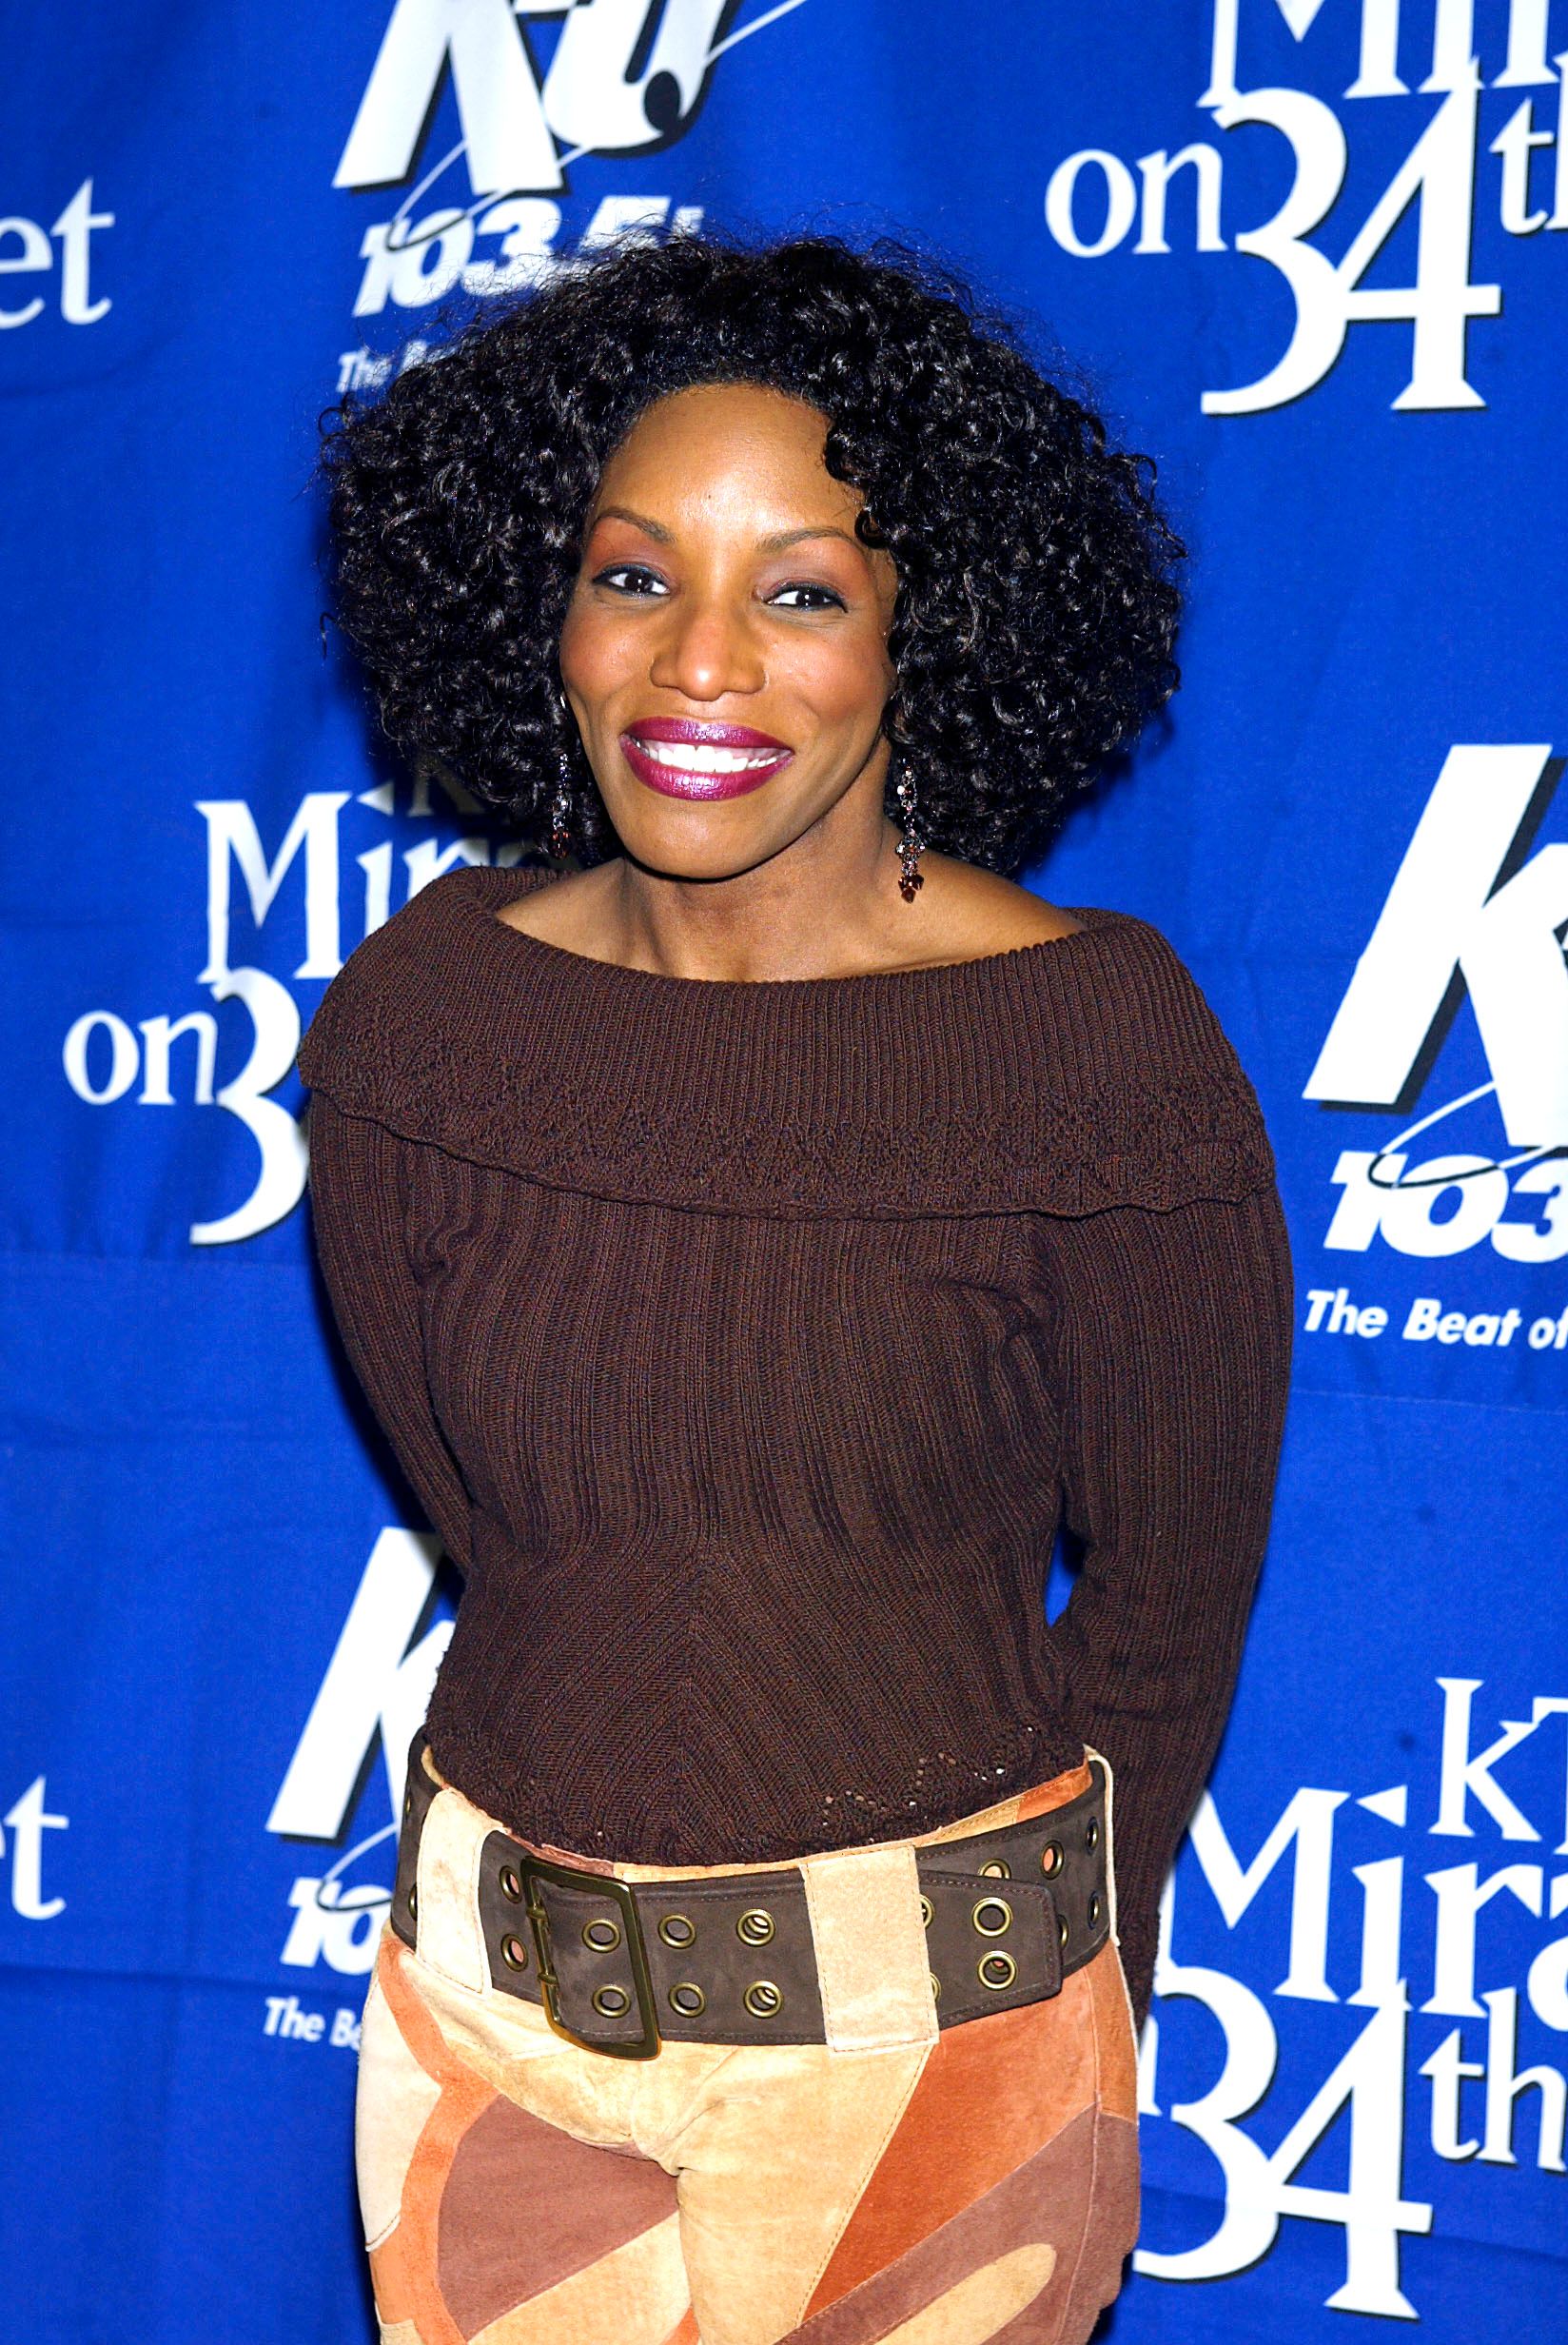 Stephanie Mills at "KTU's Miracle on 34th Street" hoilday concert at Madison Square Garden in New York City on December 18, 2002 | Photo: Getty Images